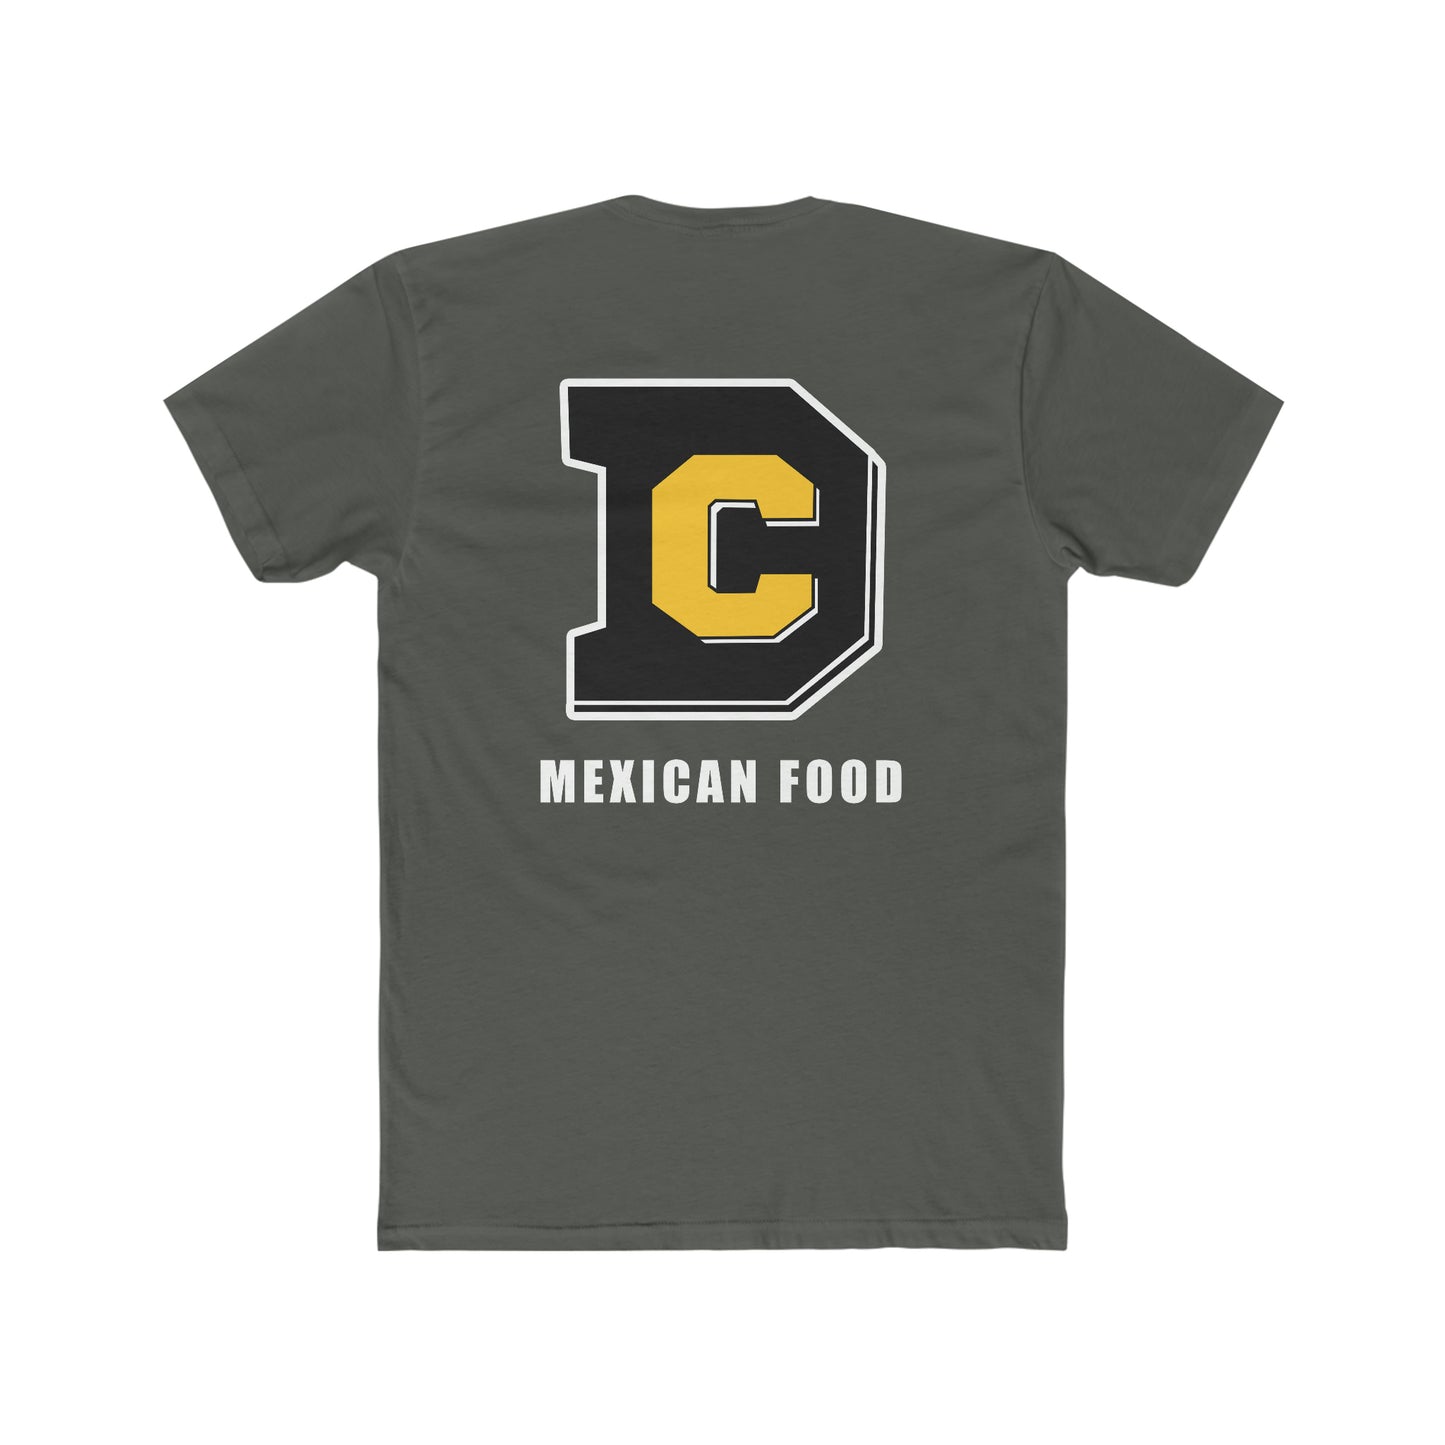 DC Mexican Food Black/White 2 sided  Cotton Crew Tee Next Level 3600